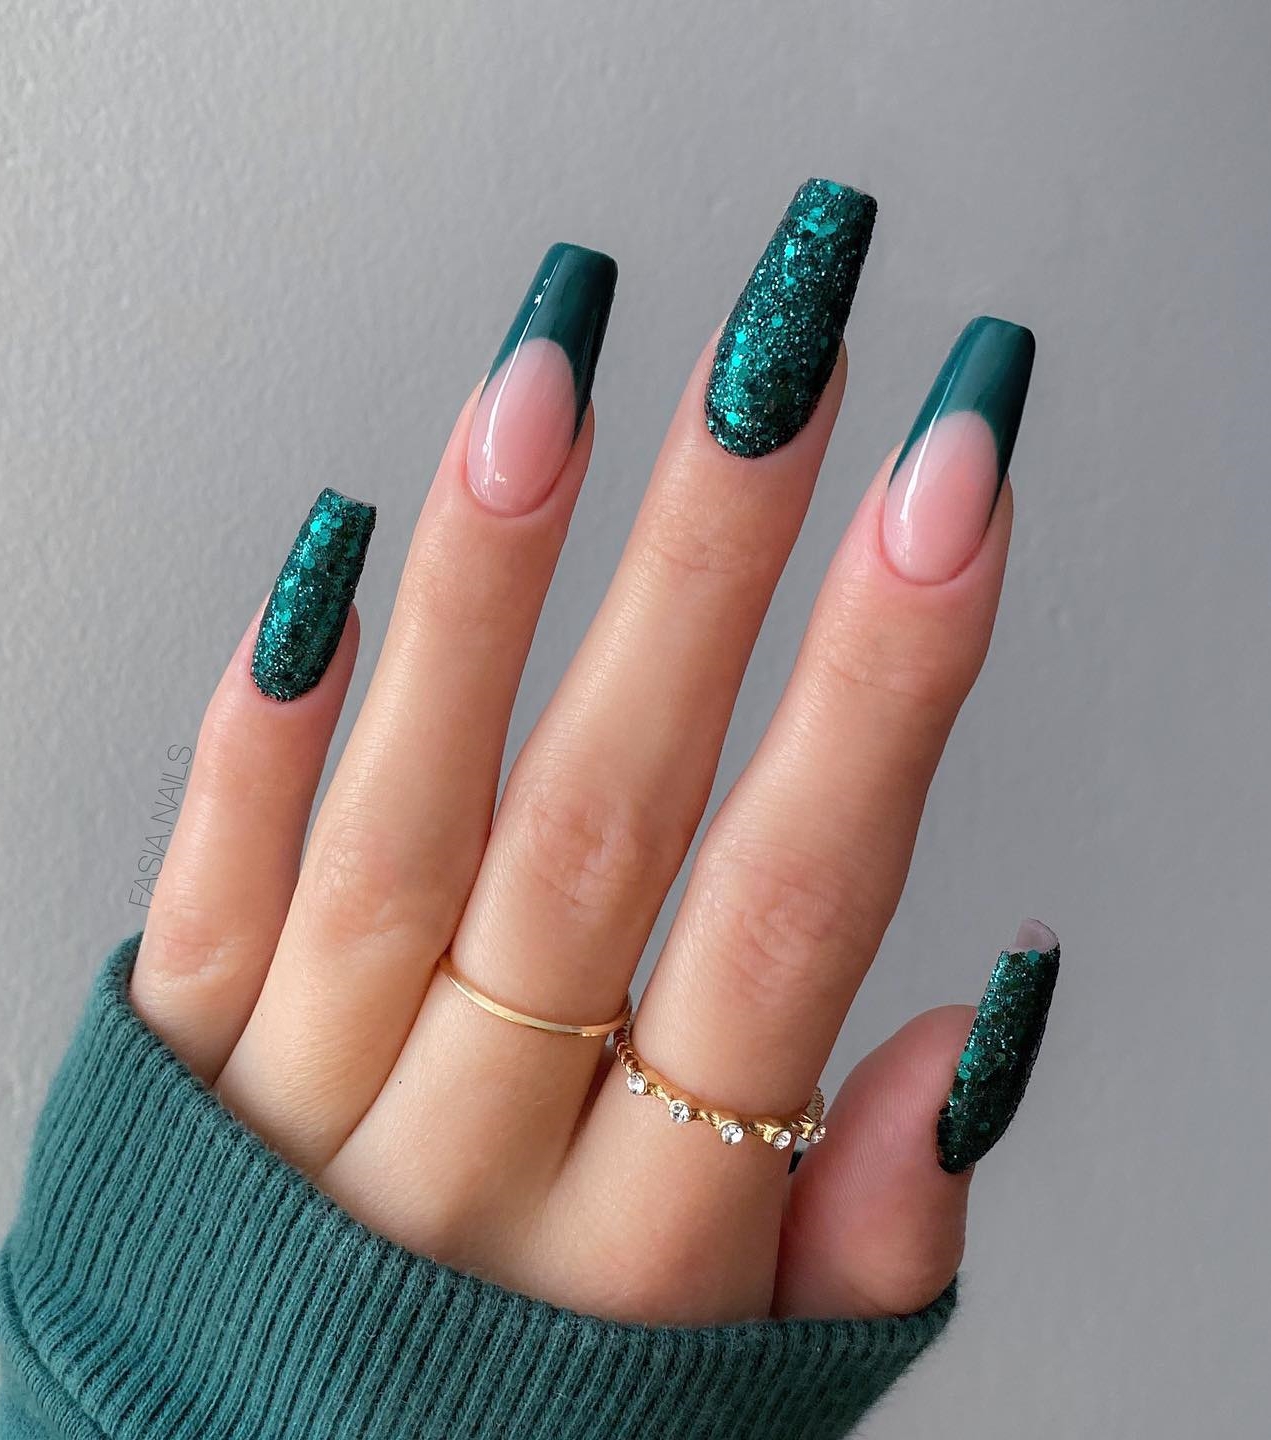 Long Square Dark Emerald Nails with Sparkles